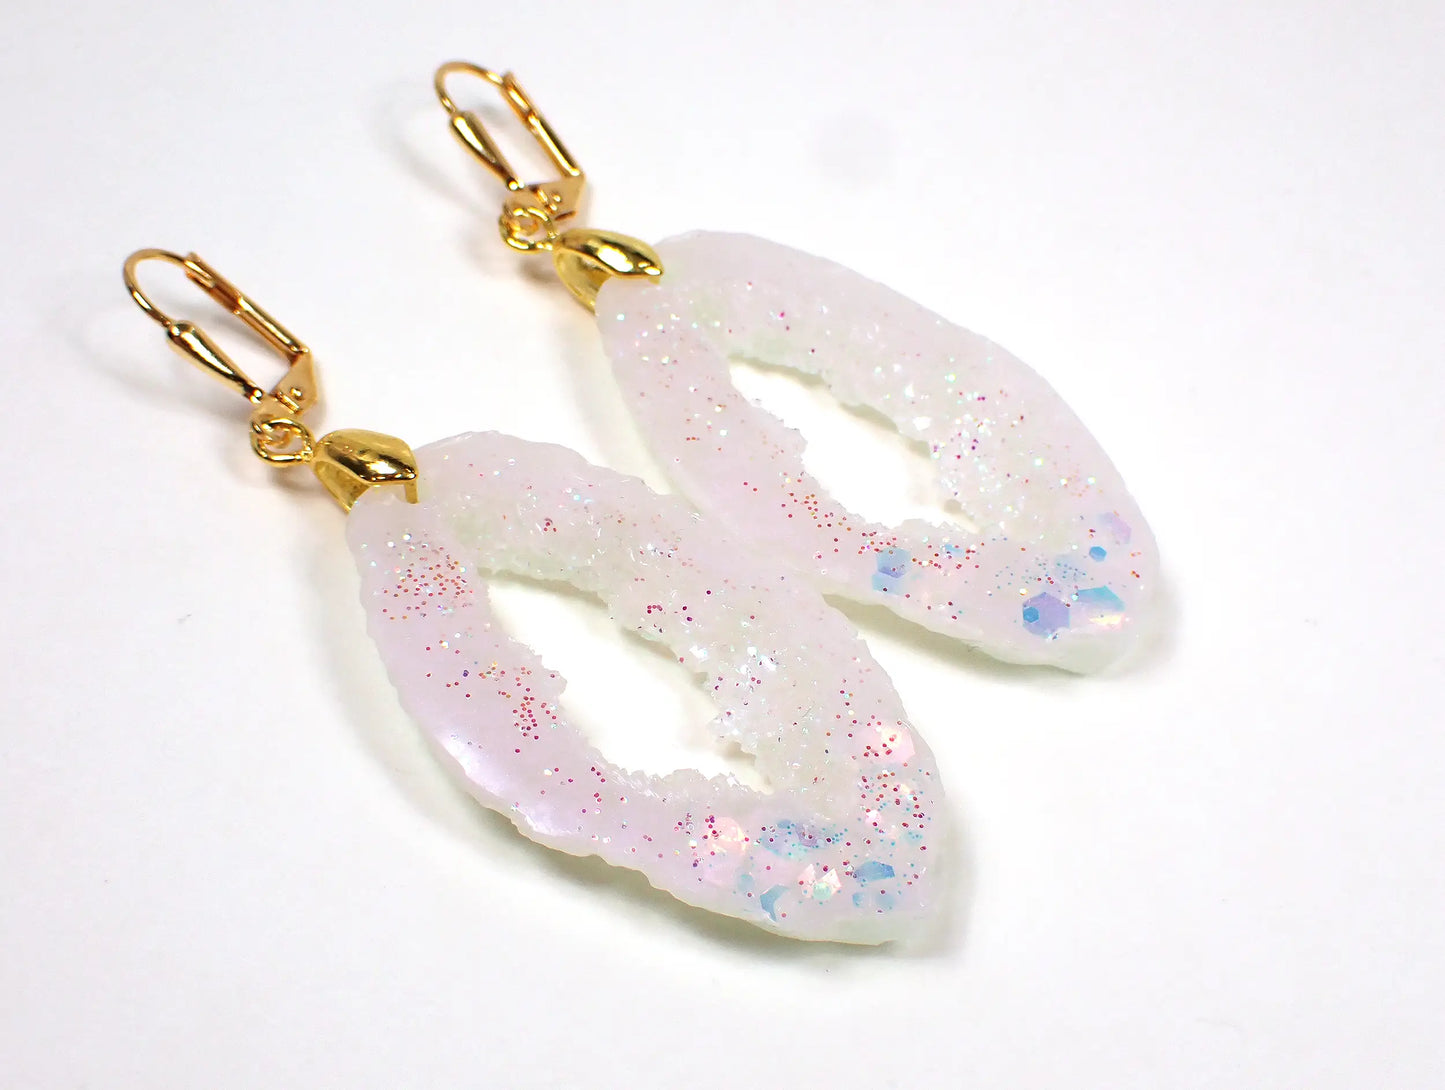 Iridescent Glitter and Pearly White Oval Druzy Geode Style Handmade Resin Earrings Hook Lever Back or Clip On